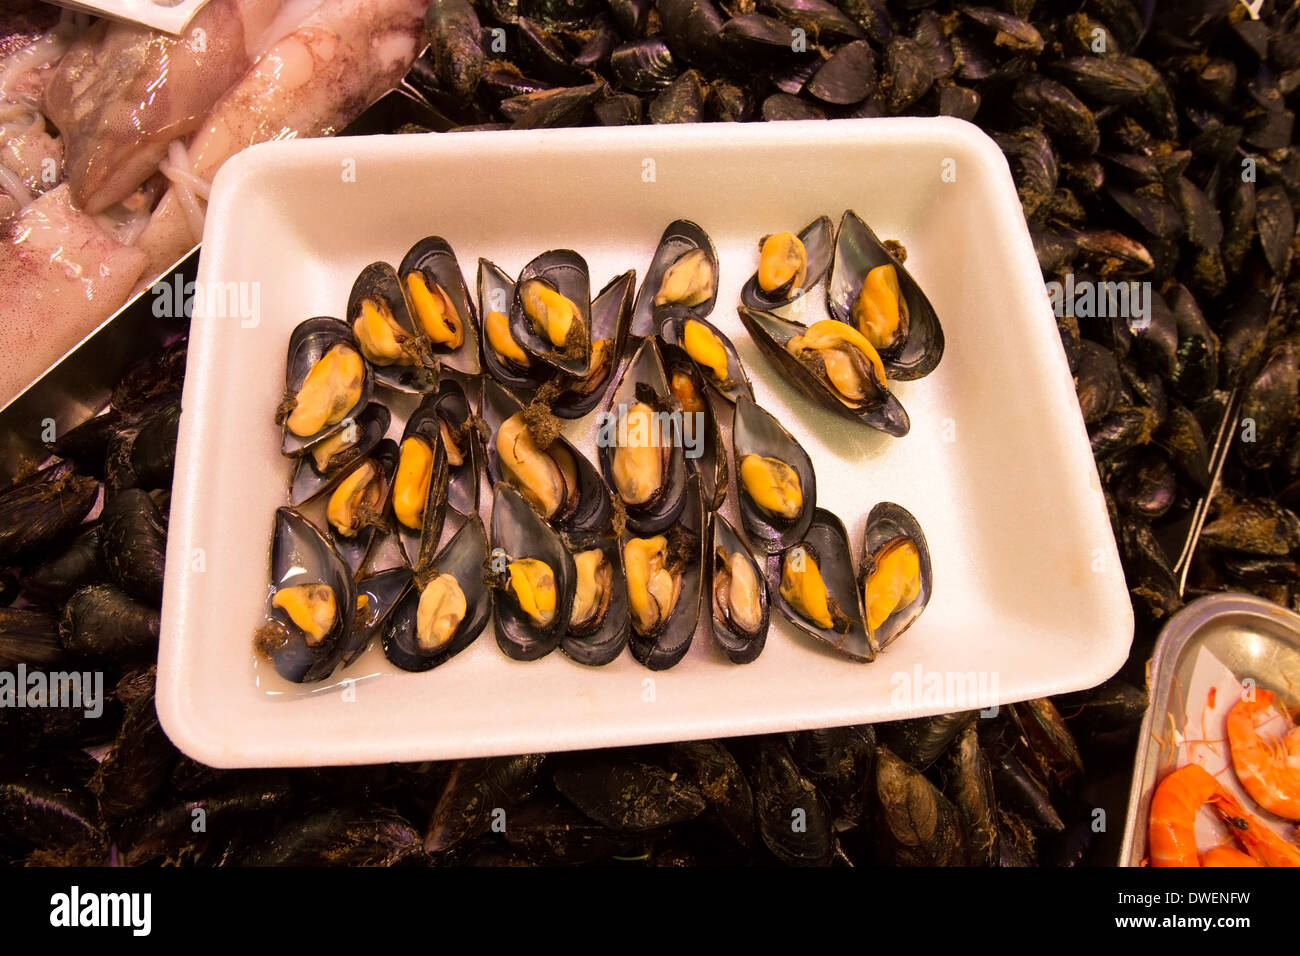 Mussels in the famous St Joseph Food Market - Eixample district of Barcelona - Catalonia region of Spain Stock Photo